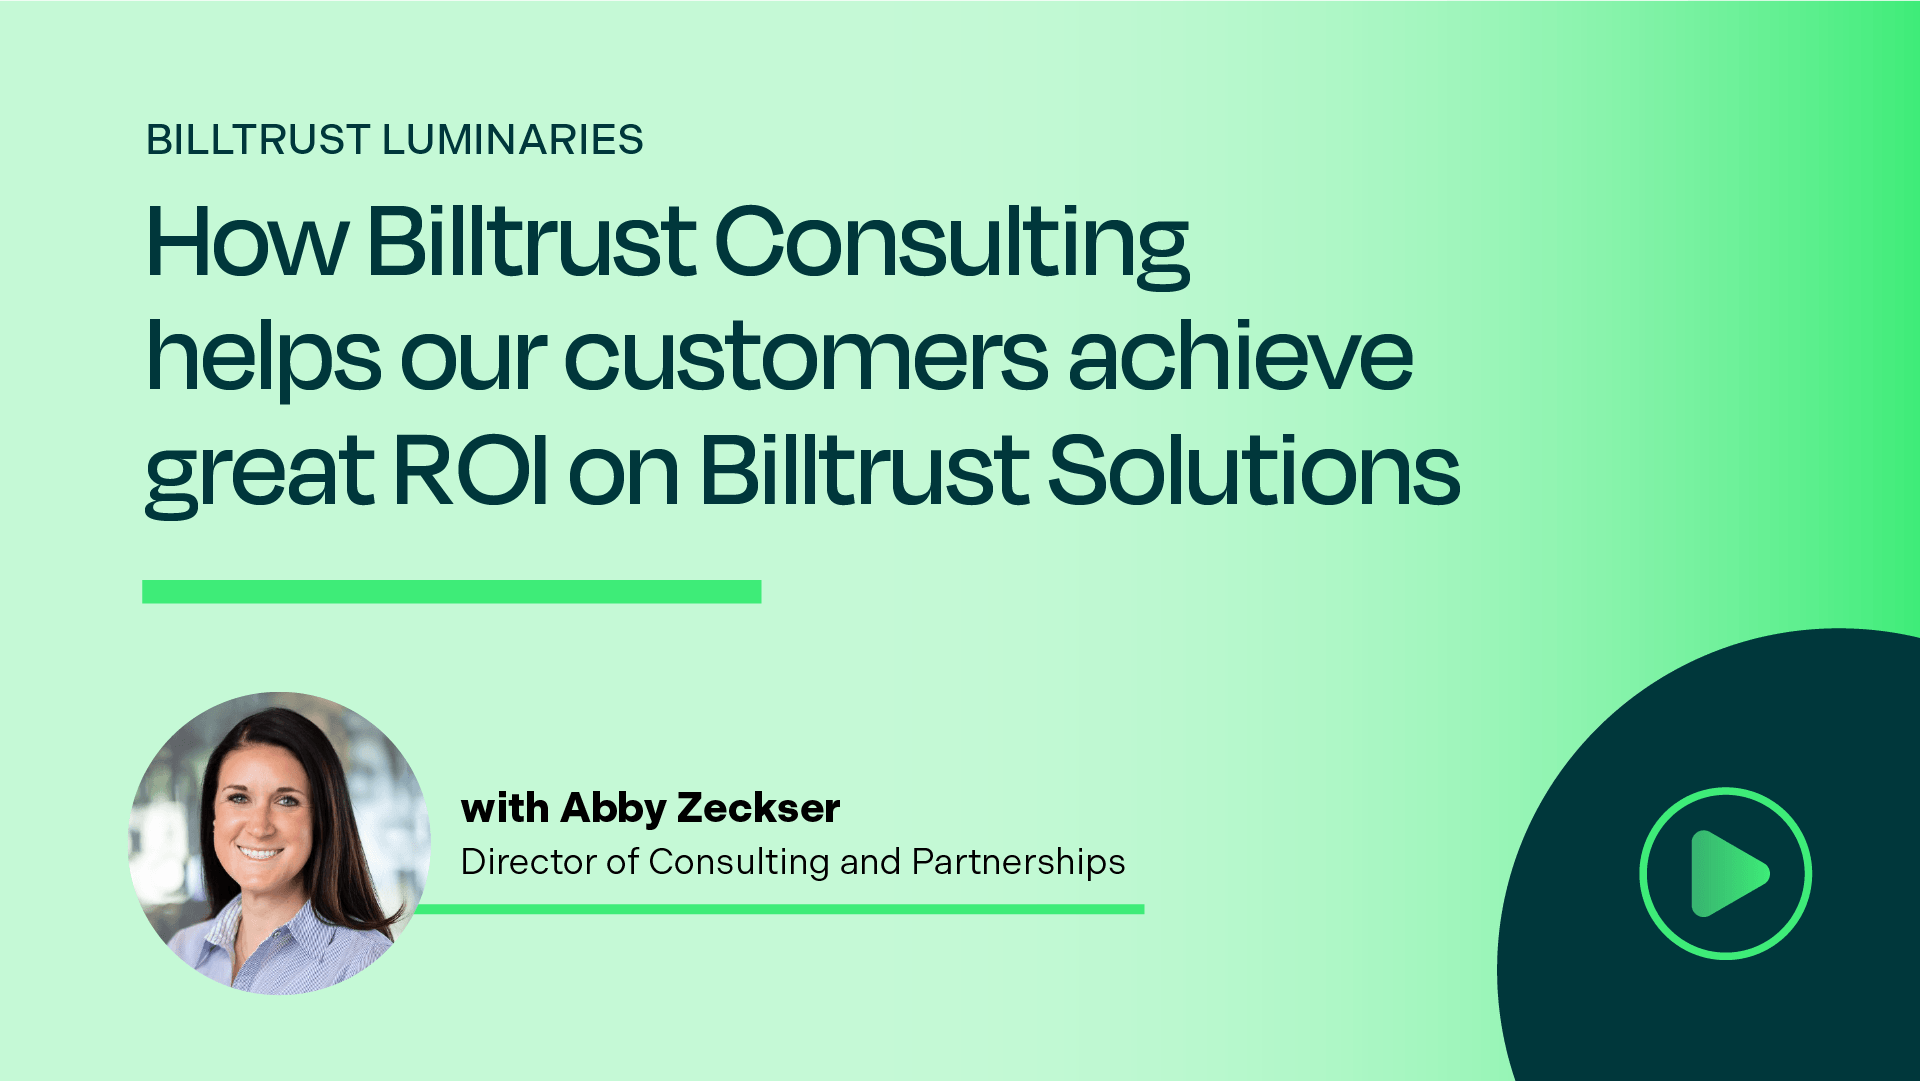 How Billtrust Consulting helps our customers achieve great ROI on Billtrust Solutions